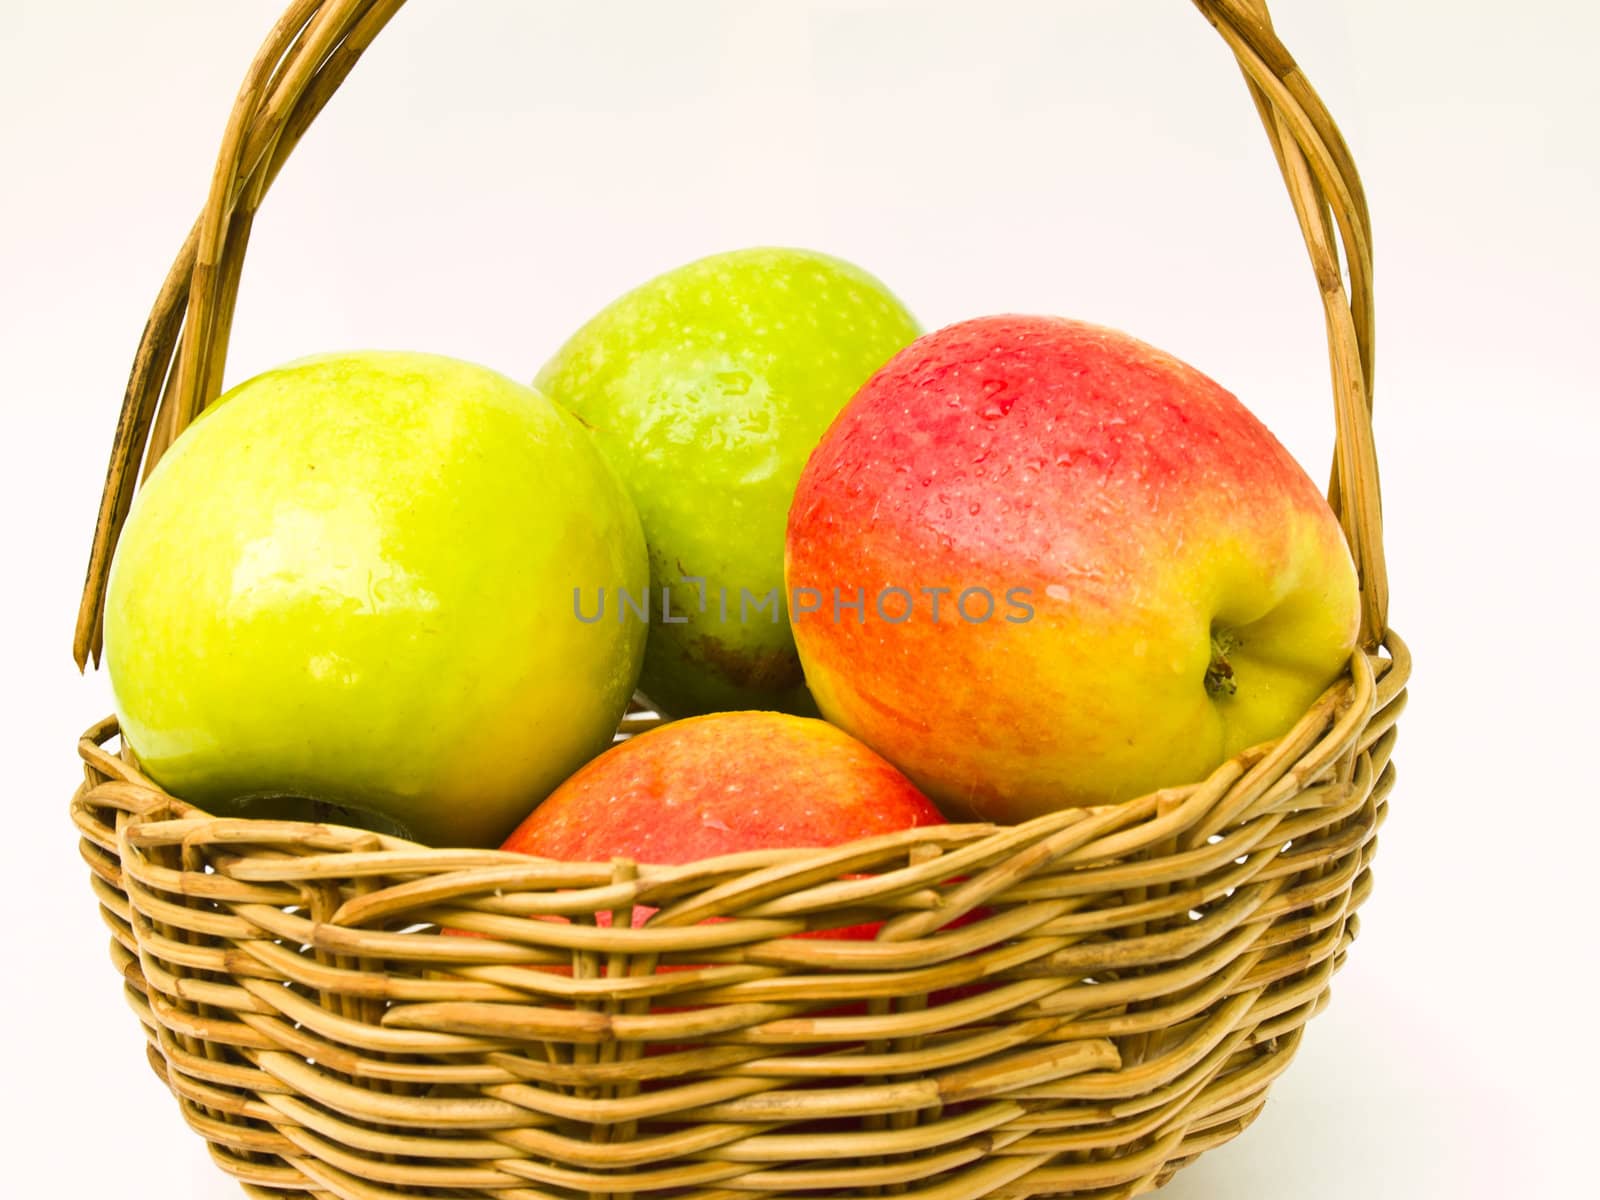 Green and red apples in a basket